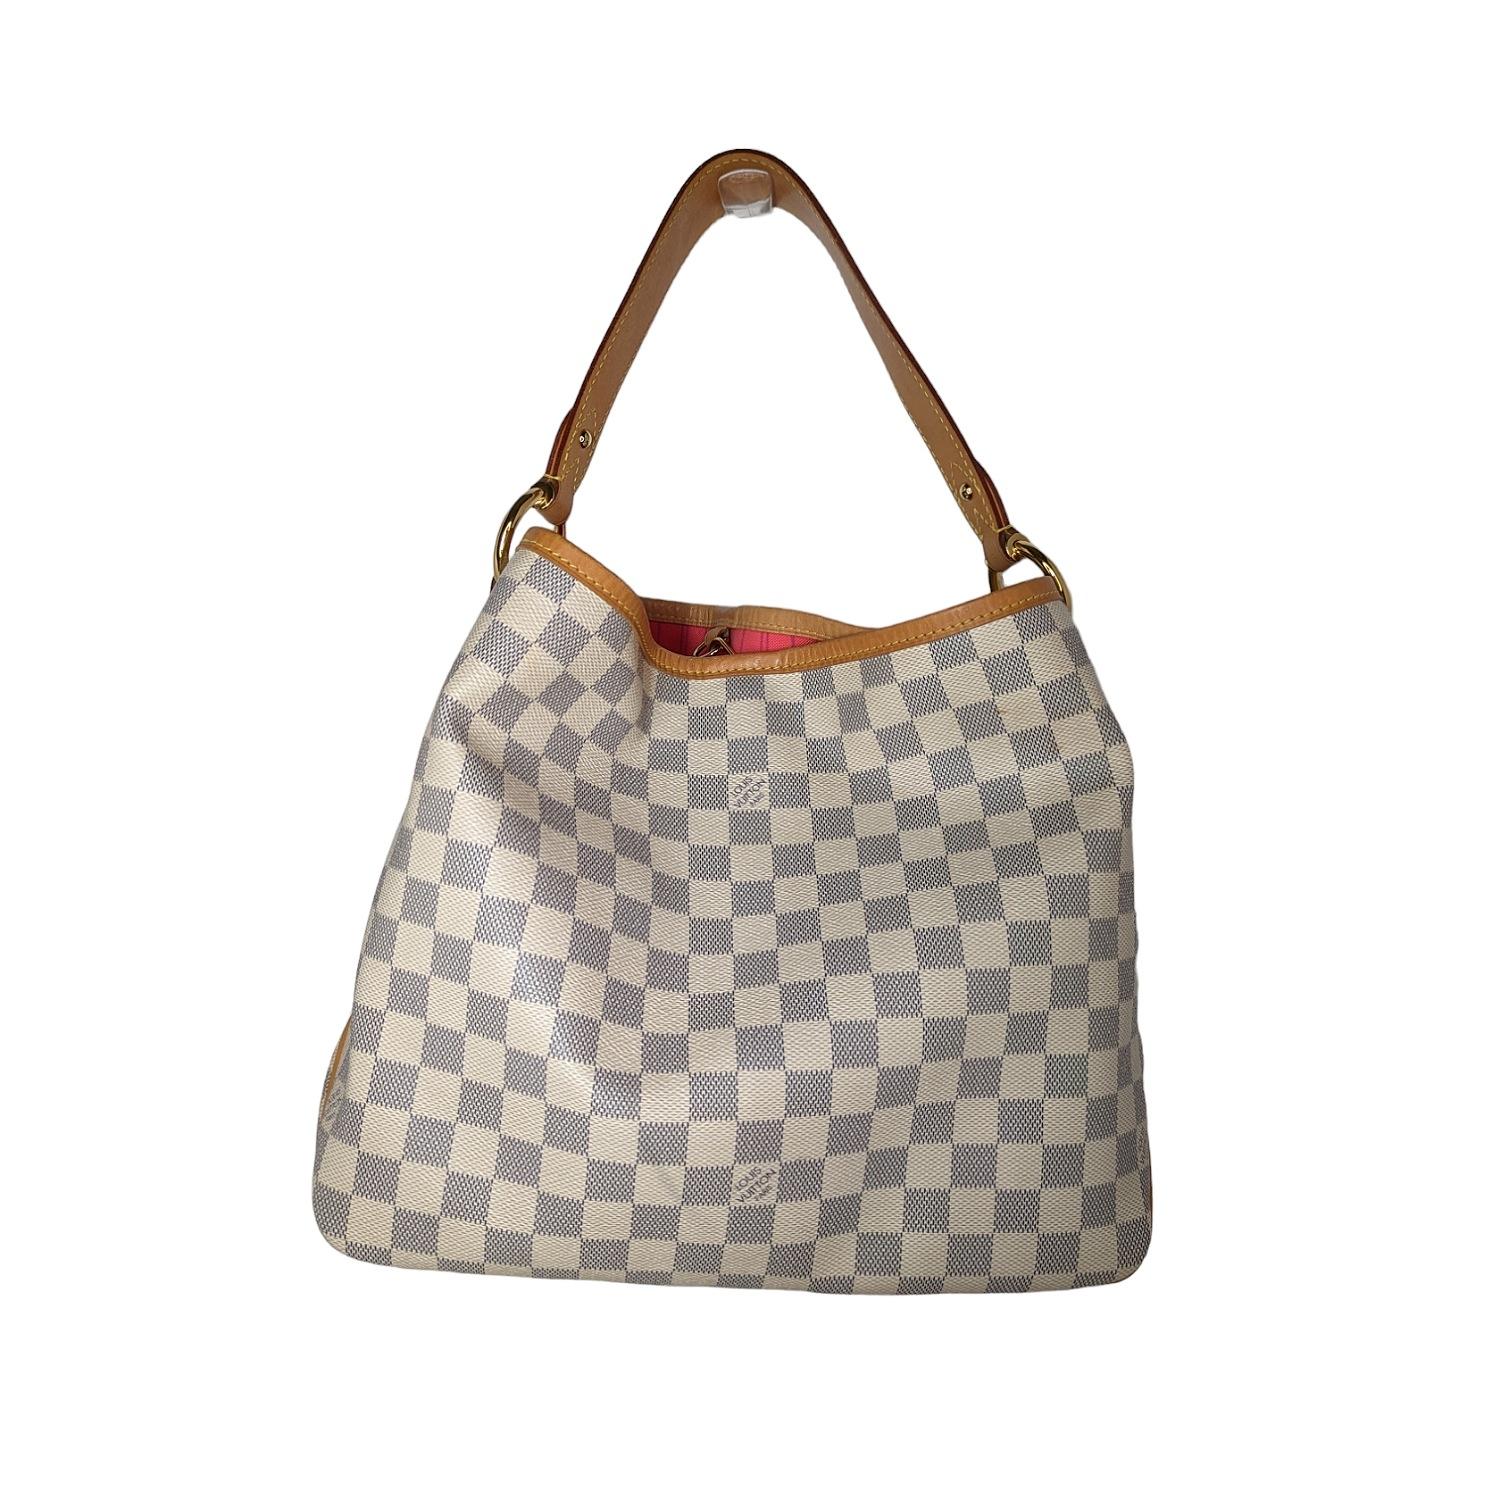 This stylish shoulder bag is finely crafted of classic Louis Vuitton Damier canvas in blue and white. The bag features a looping vachetta cowhide leather shoulder strap and trim, with polished brass hardware. The top opens to a hot pink striped